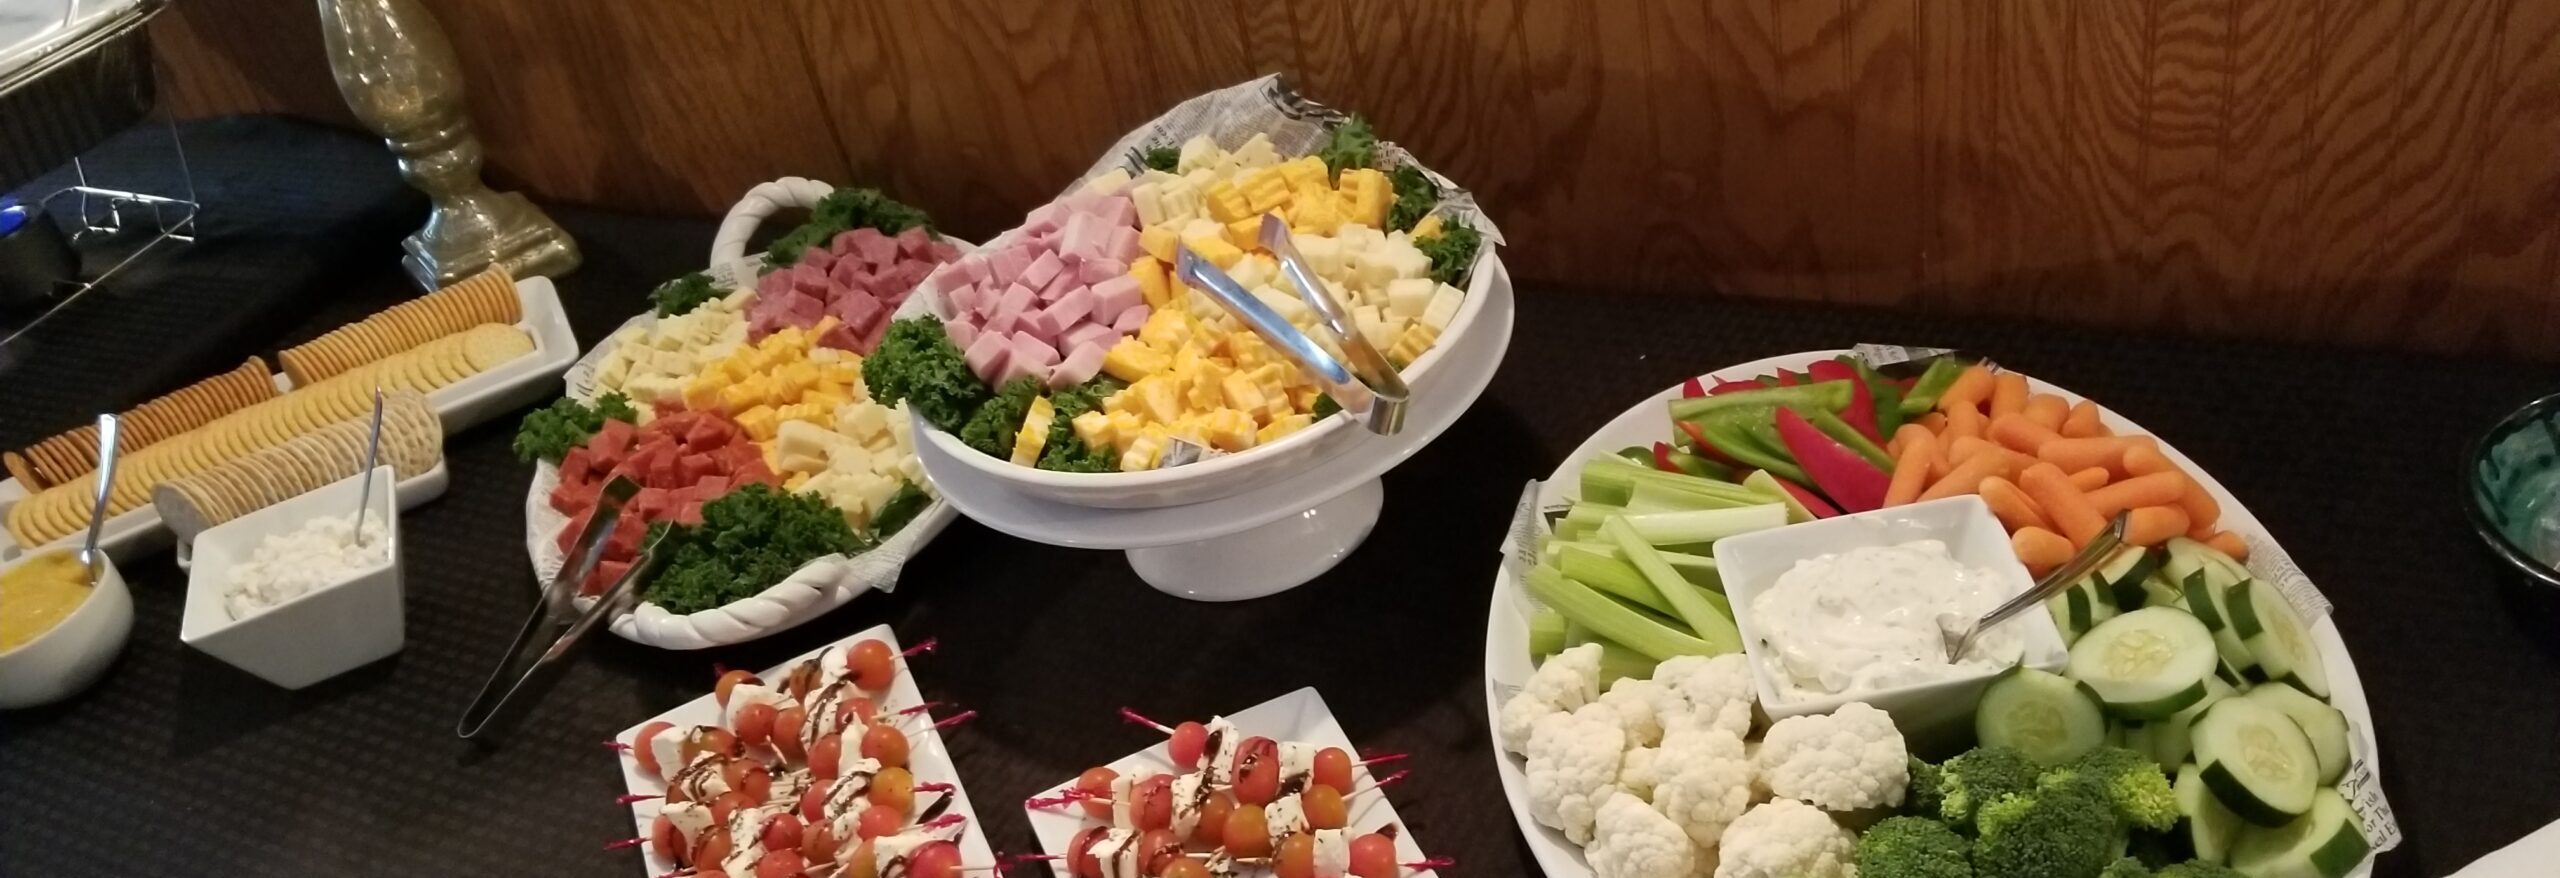 Fast, friendly, and affordable catering options in Southpointe, Canonsburg, PA